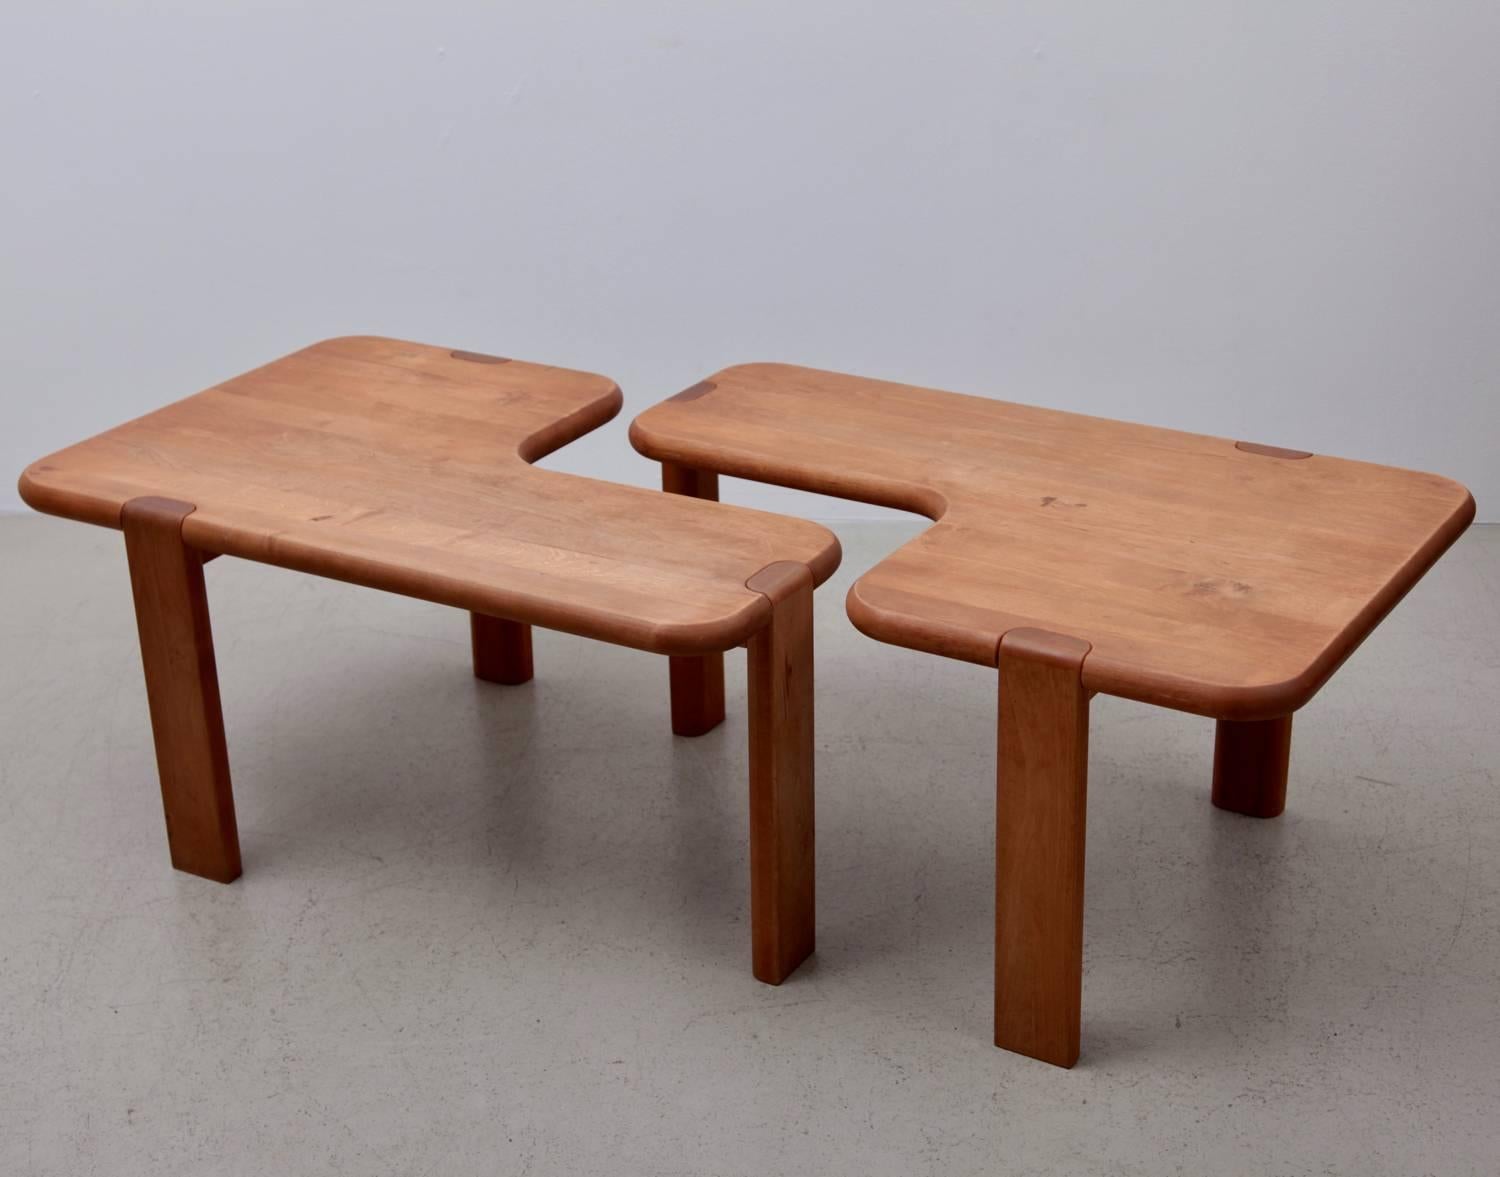 Sculptural pair of Aksel Kjersgaard coffee tables. One has a little stain spot which does not effect the piece at all. Heavy and solid.